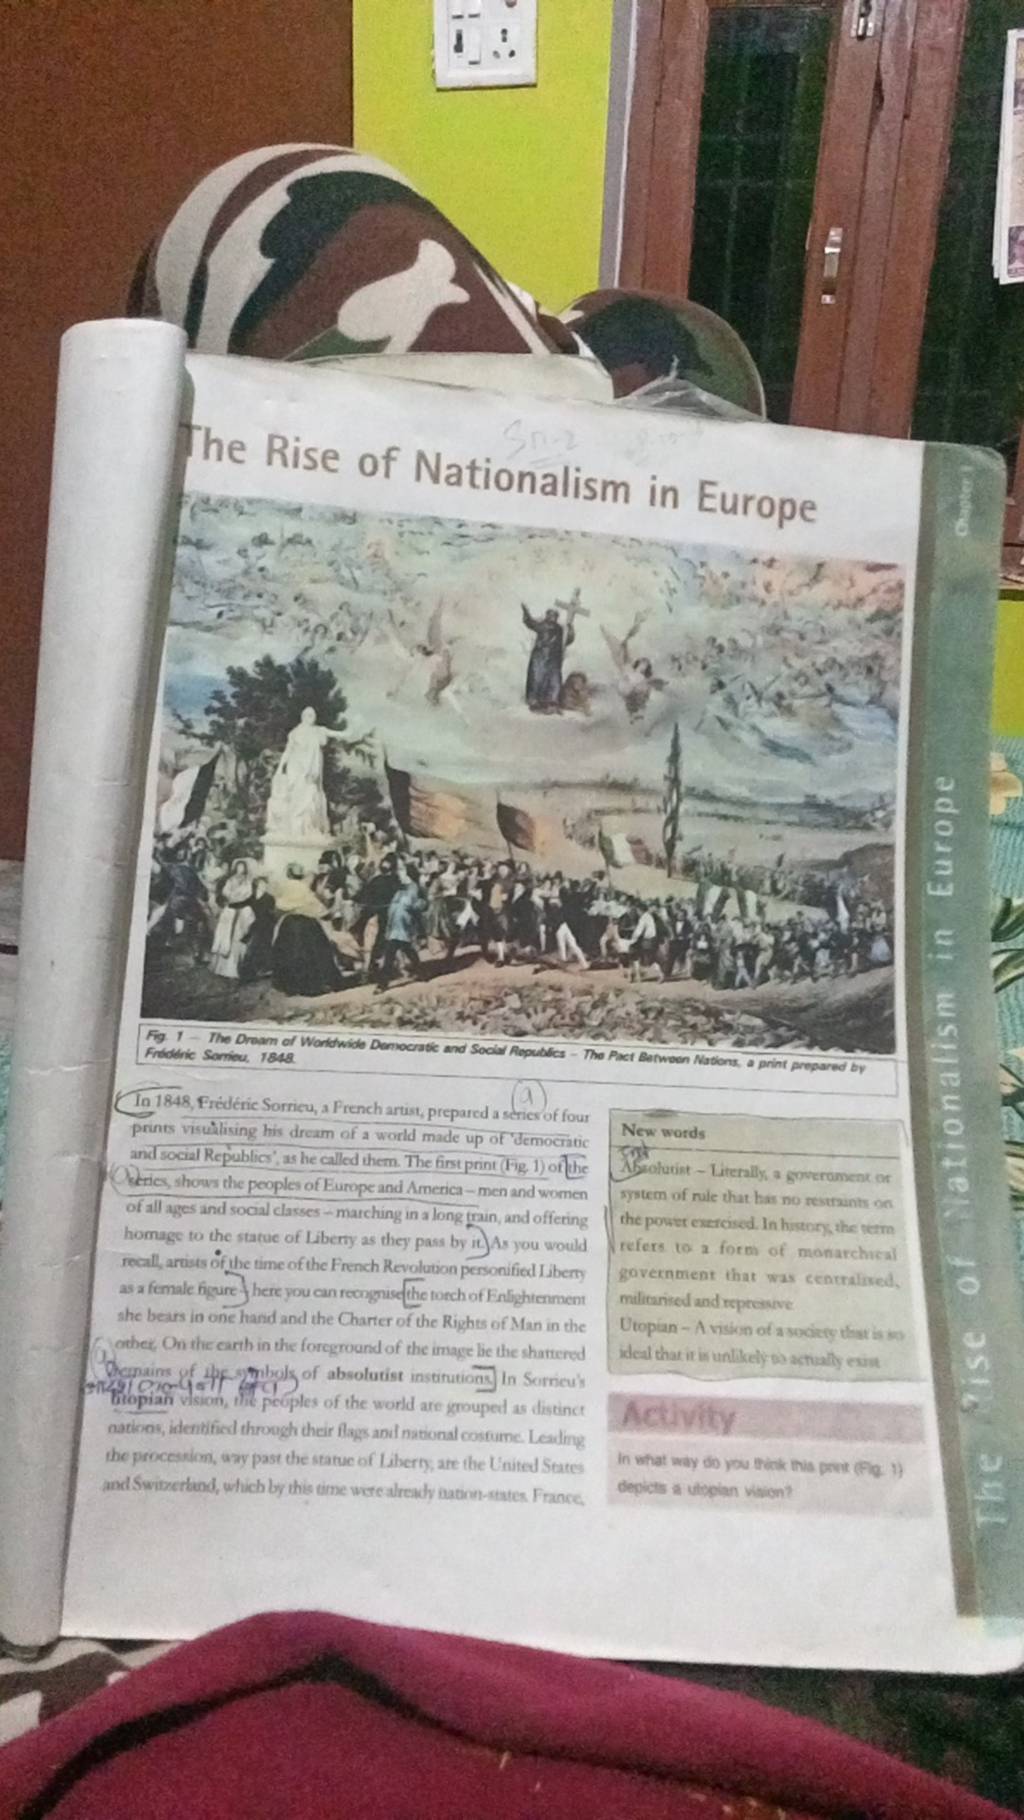 rise of nationalism in europe by Diza's Vlog World - Issuu